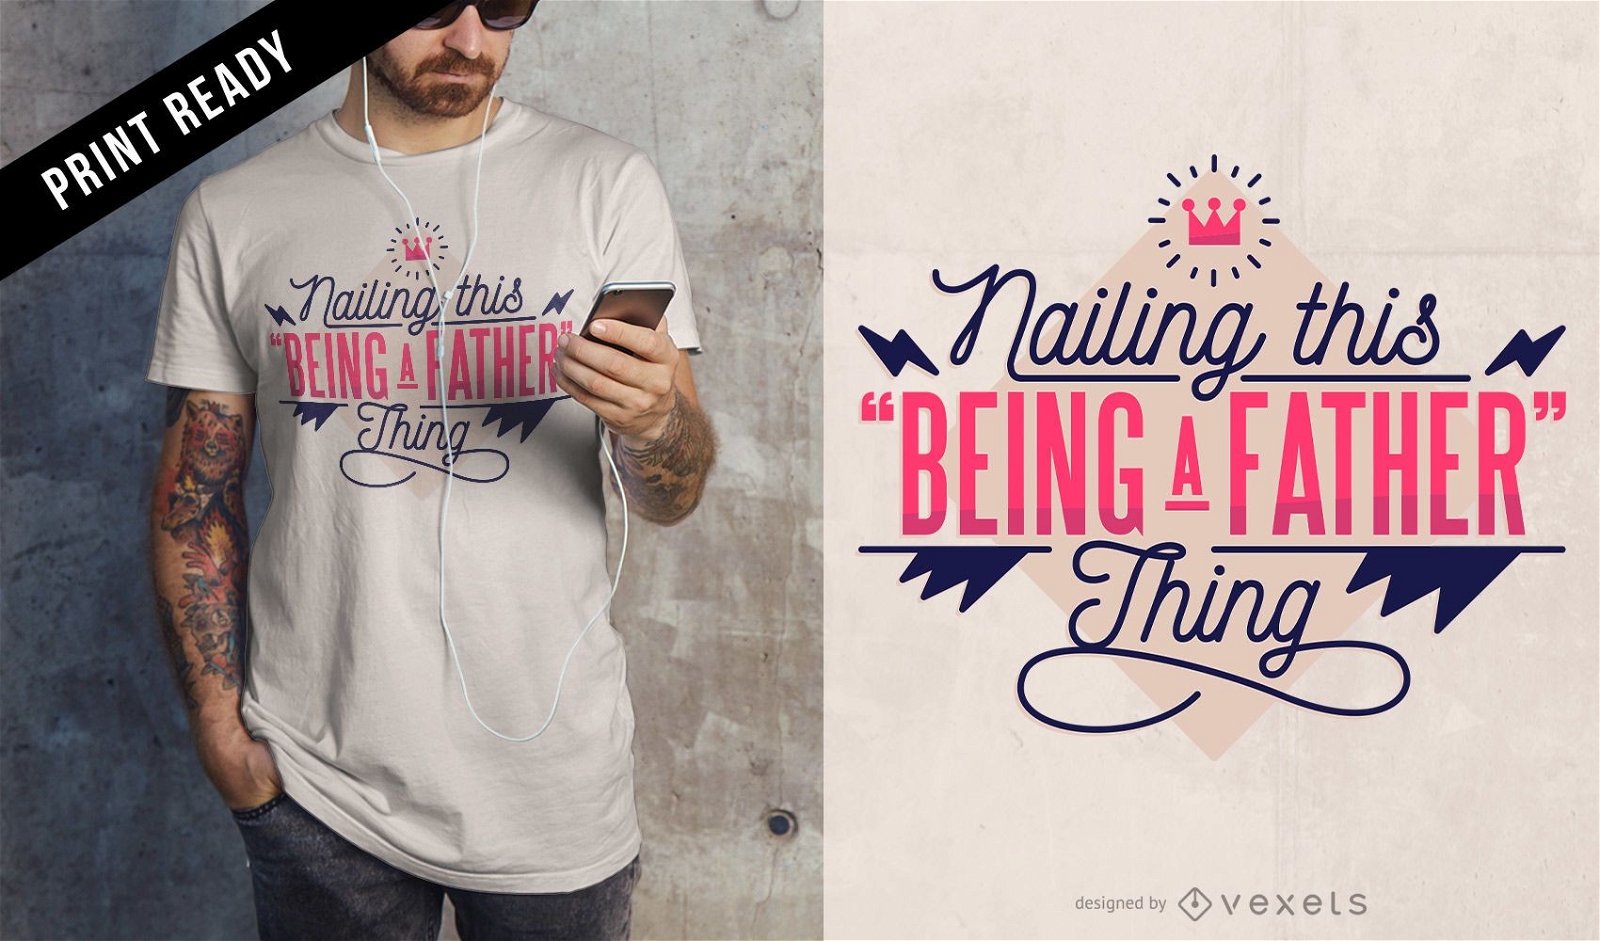 Being father t-shirt design